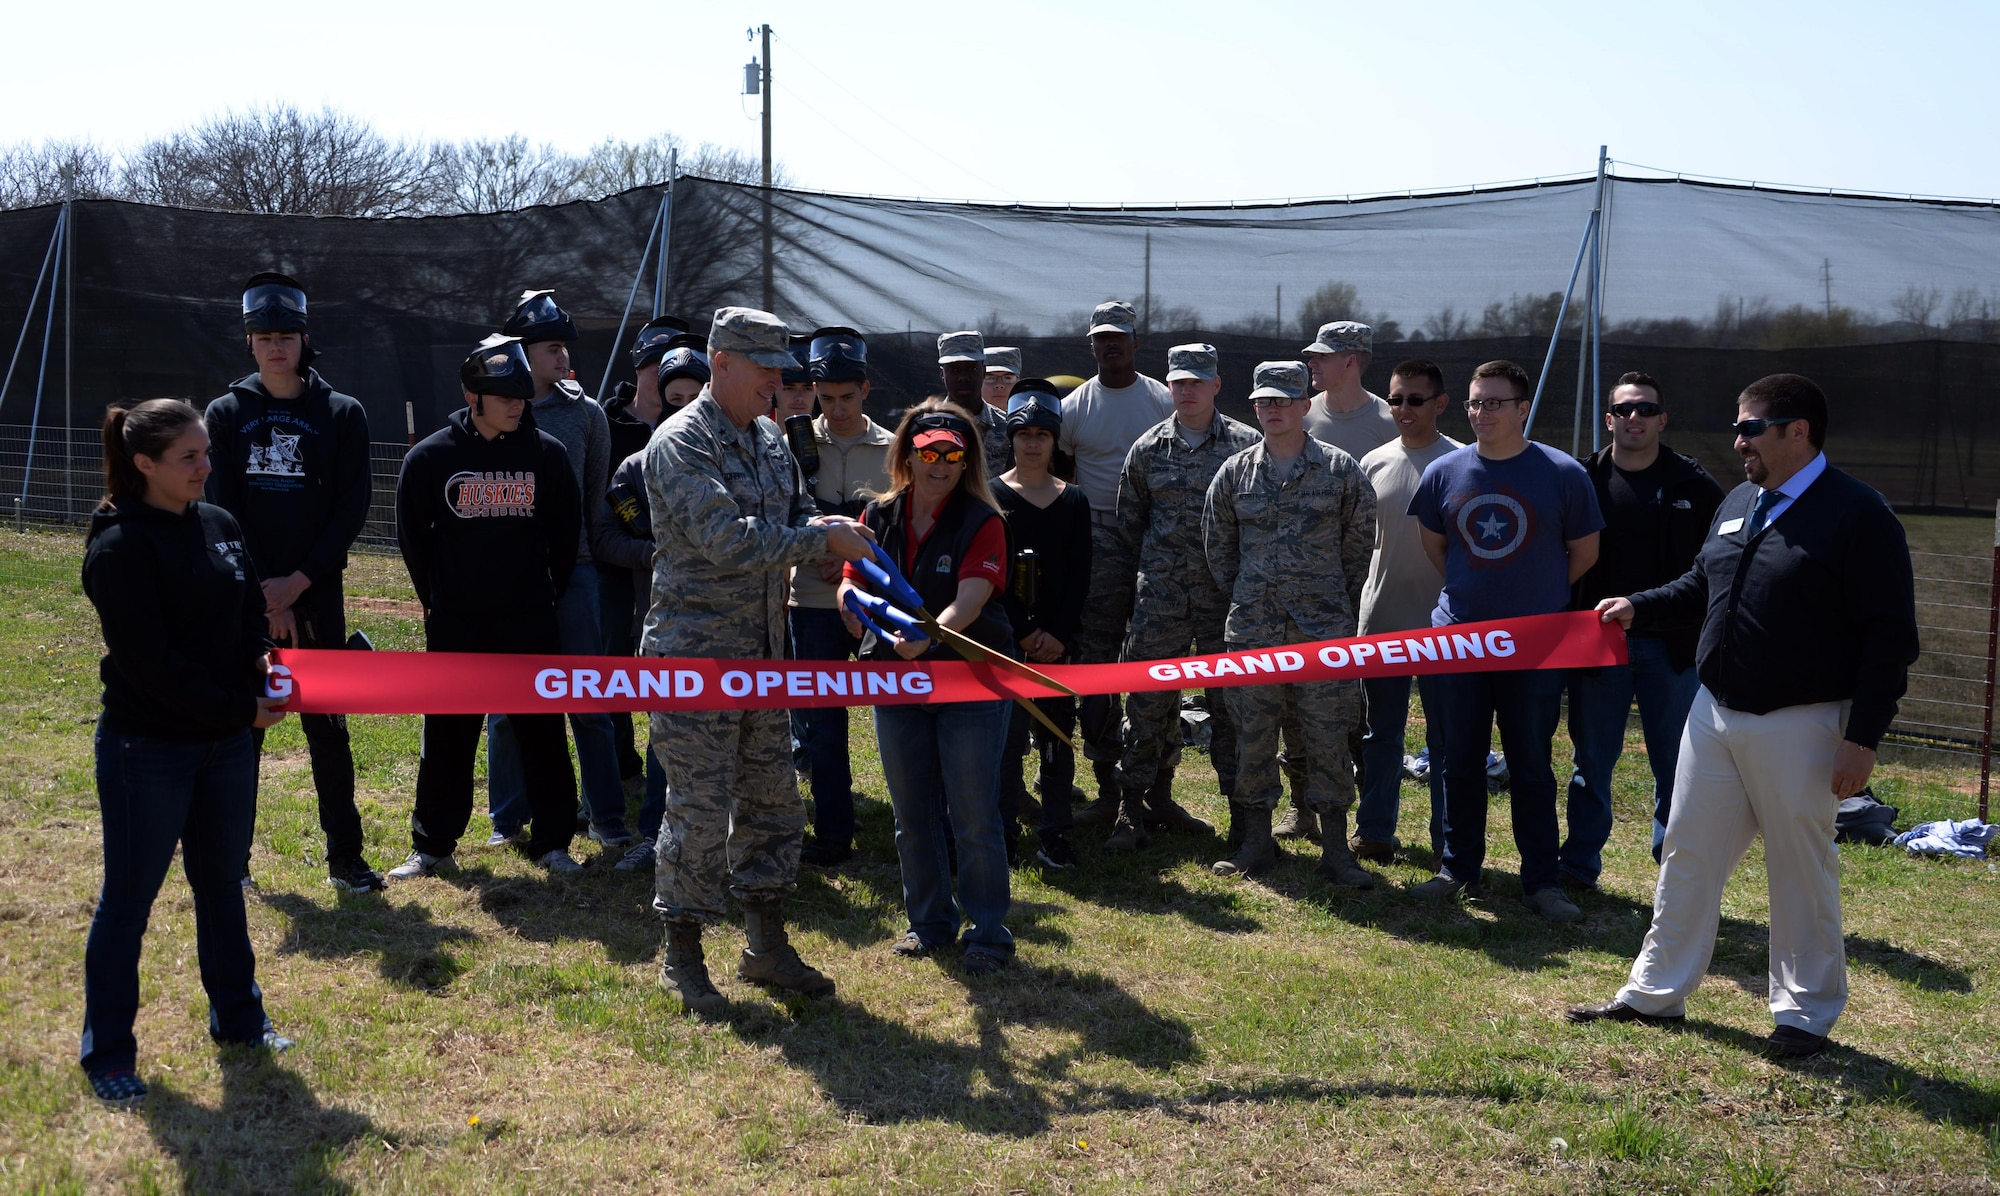 Brig. Gen. Patrick Doherty, 82nd Training Wing commander, along with Elizabeth Clements, Outdoor Recreation director, cut the ribbon during the grand opening of the paintball facility at Wind Creek Park on Sheppard Air Force Base, Texas, March 15, 2017. (U.S. Air Force photo by Senior Airman Robert L. McIlrath/Released)